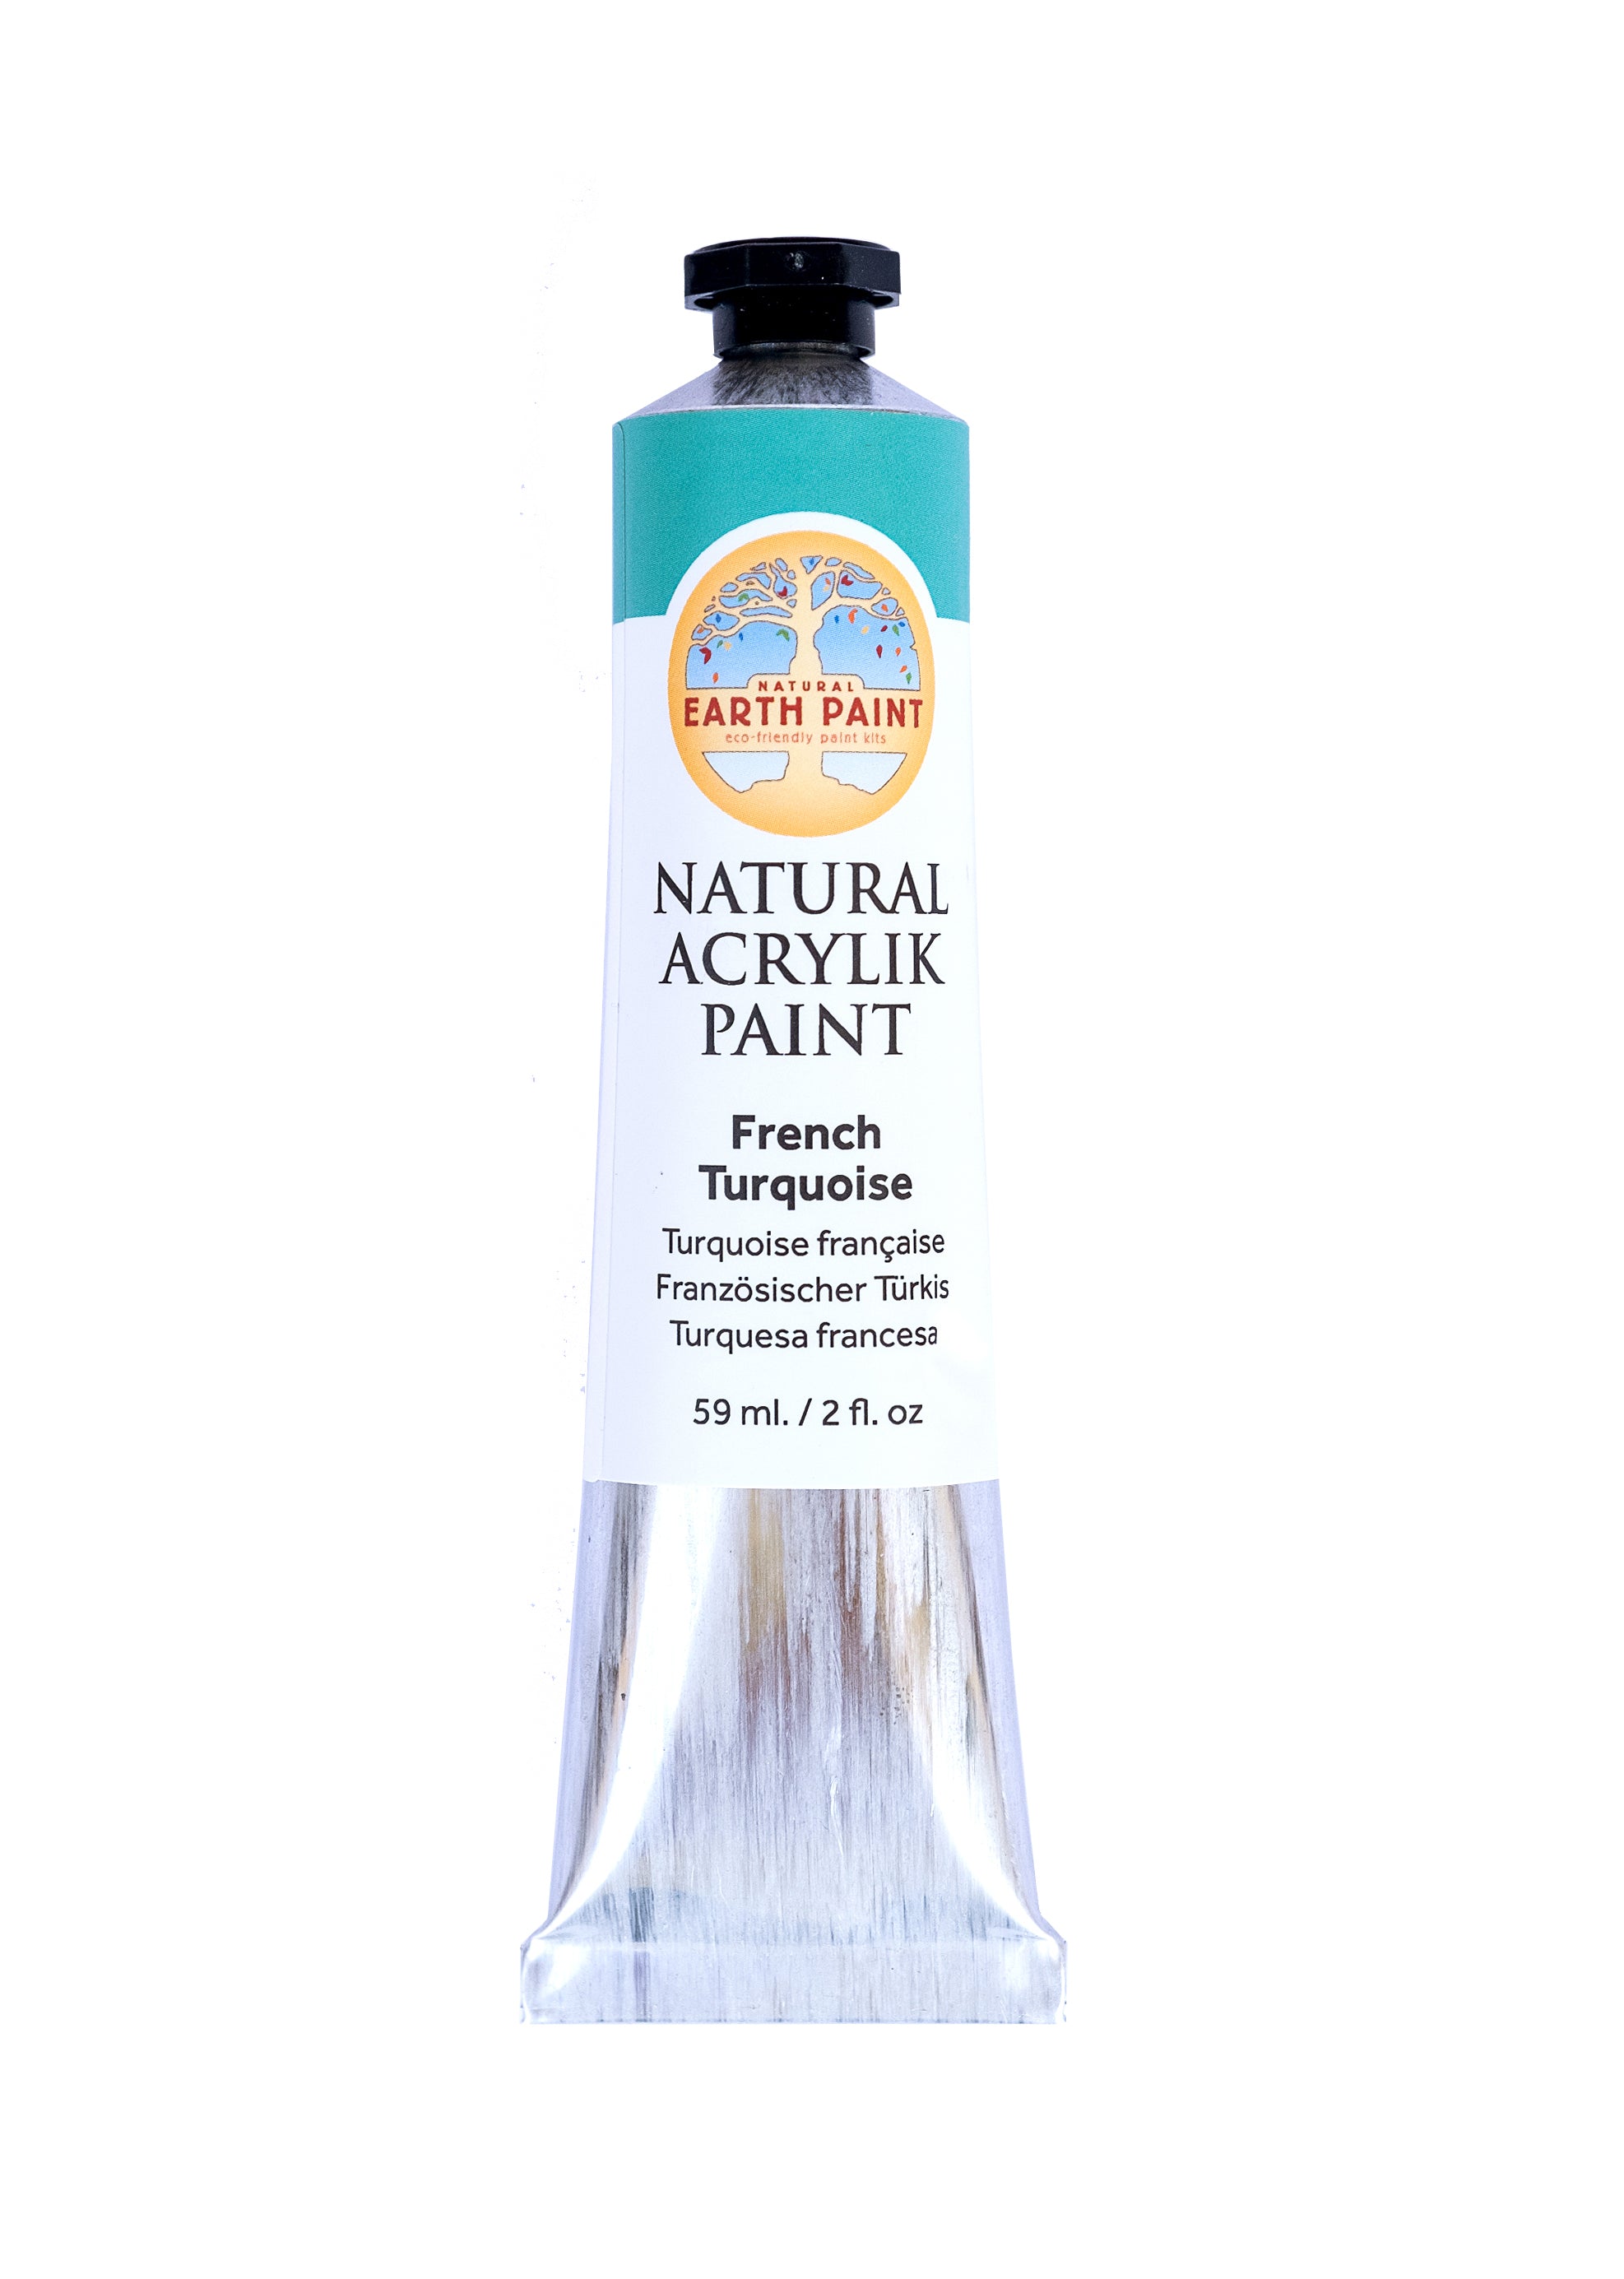 Natural Acrylik Paint™ - Individual Tubes-acrylic, acrylic paint, art, arts and craft, colors from the earth, earth colors, earth paint, earth pigments, eco art supplies, Eco Artist Paints, eco friendly paints, eco-friendly art supplies, eco-friendly paint, Fine Art Supplies Products, natural acrylic, natural artist paints, natural earth colors, natural paint, natural paints, non-toxic paint, nontoxic artist paints, nontoxic artist supplies, nontoxic paints, paint, sustainable art supplies-French Turquoise-